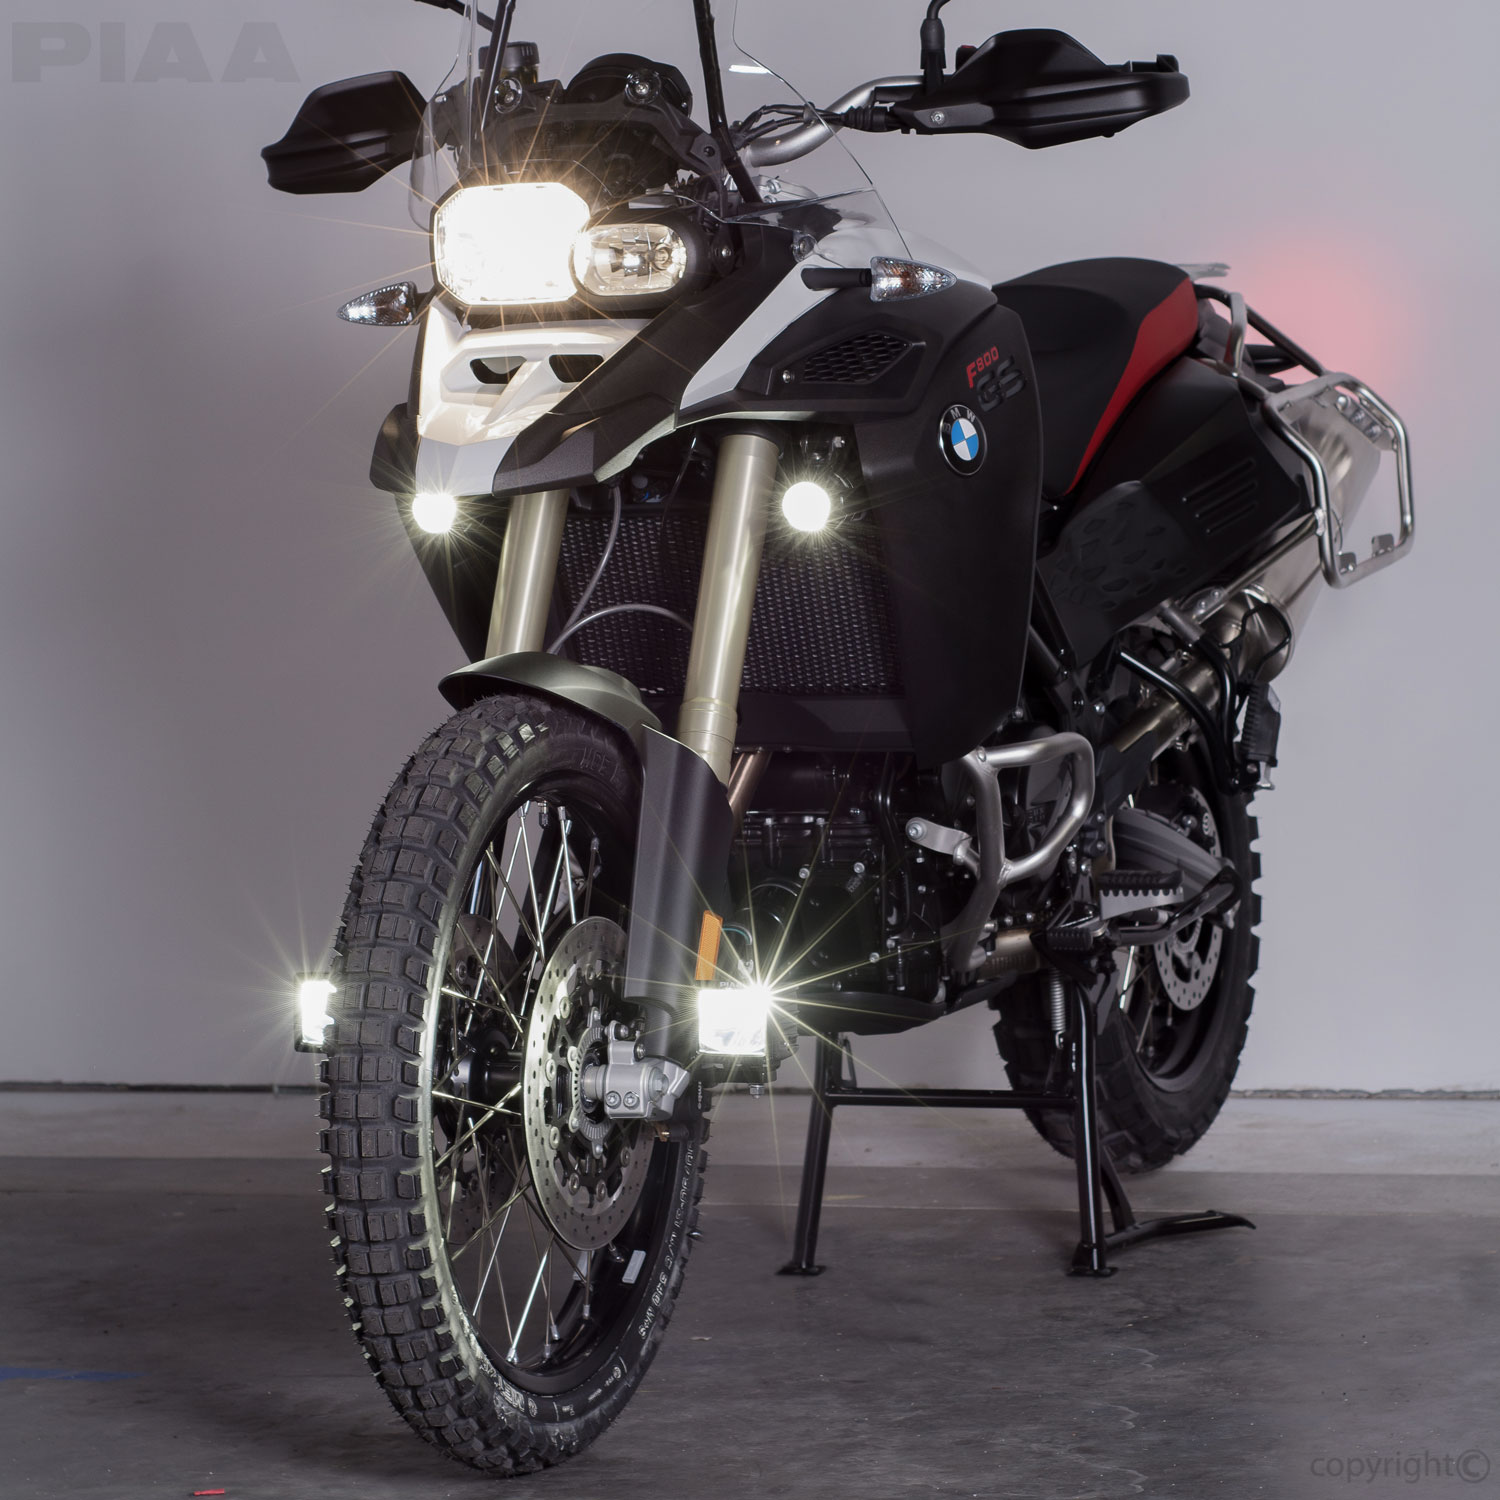 PIAA LED Lights for BMW Motorcycles